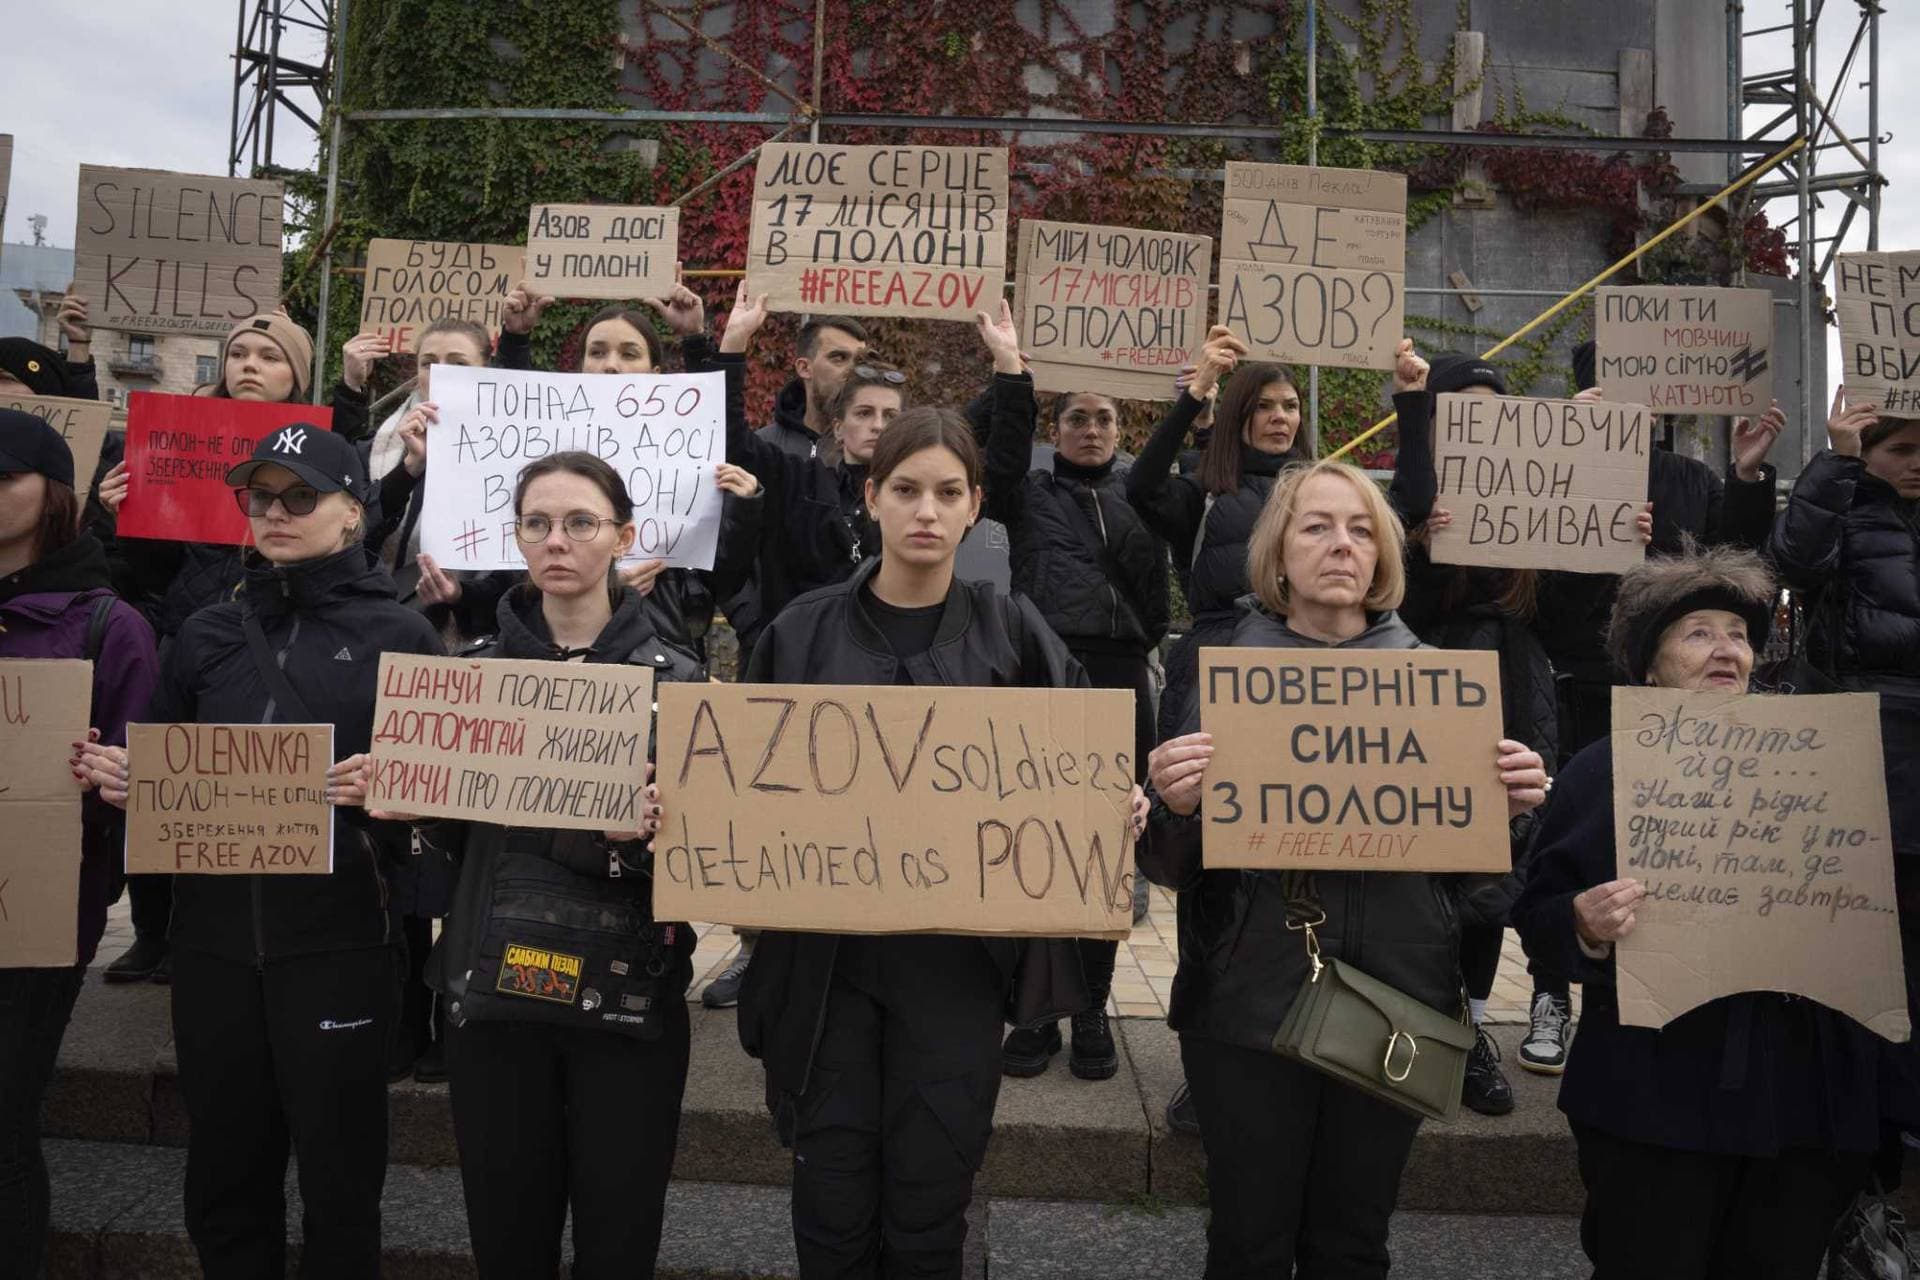 Relatives of soldiers from the Azov Regiment demand to free them at a flashmob action in Kyiv